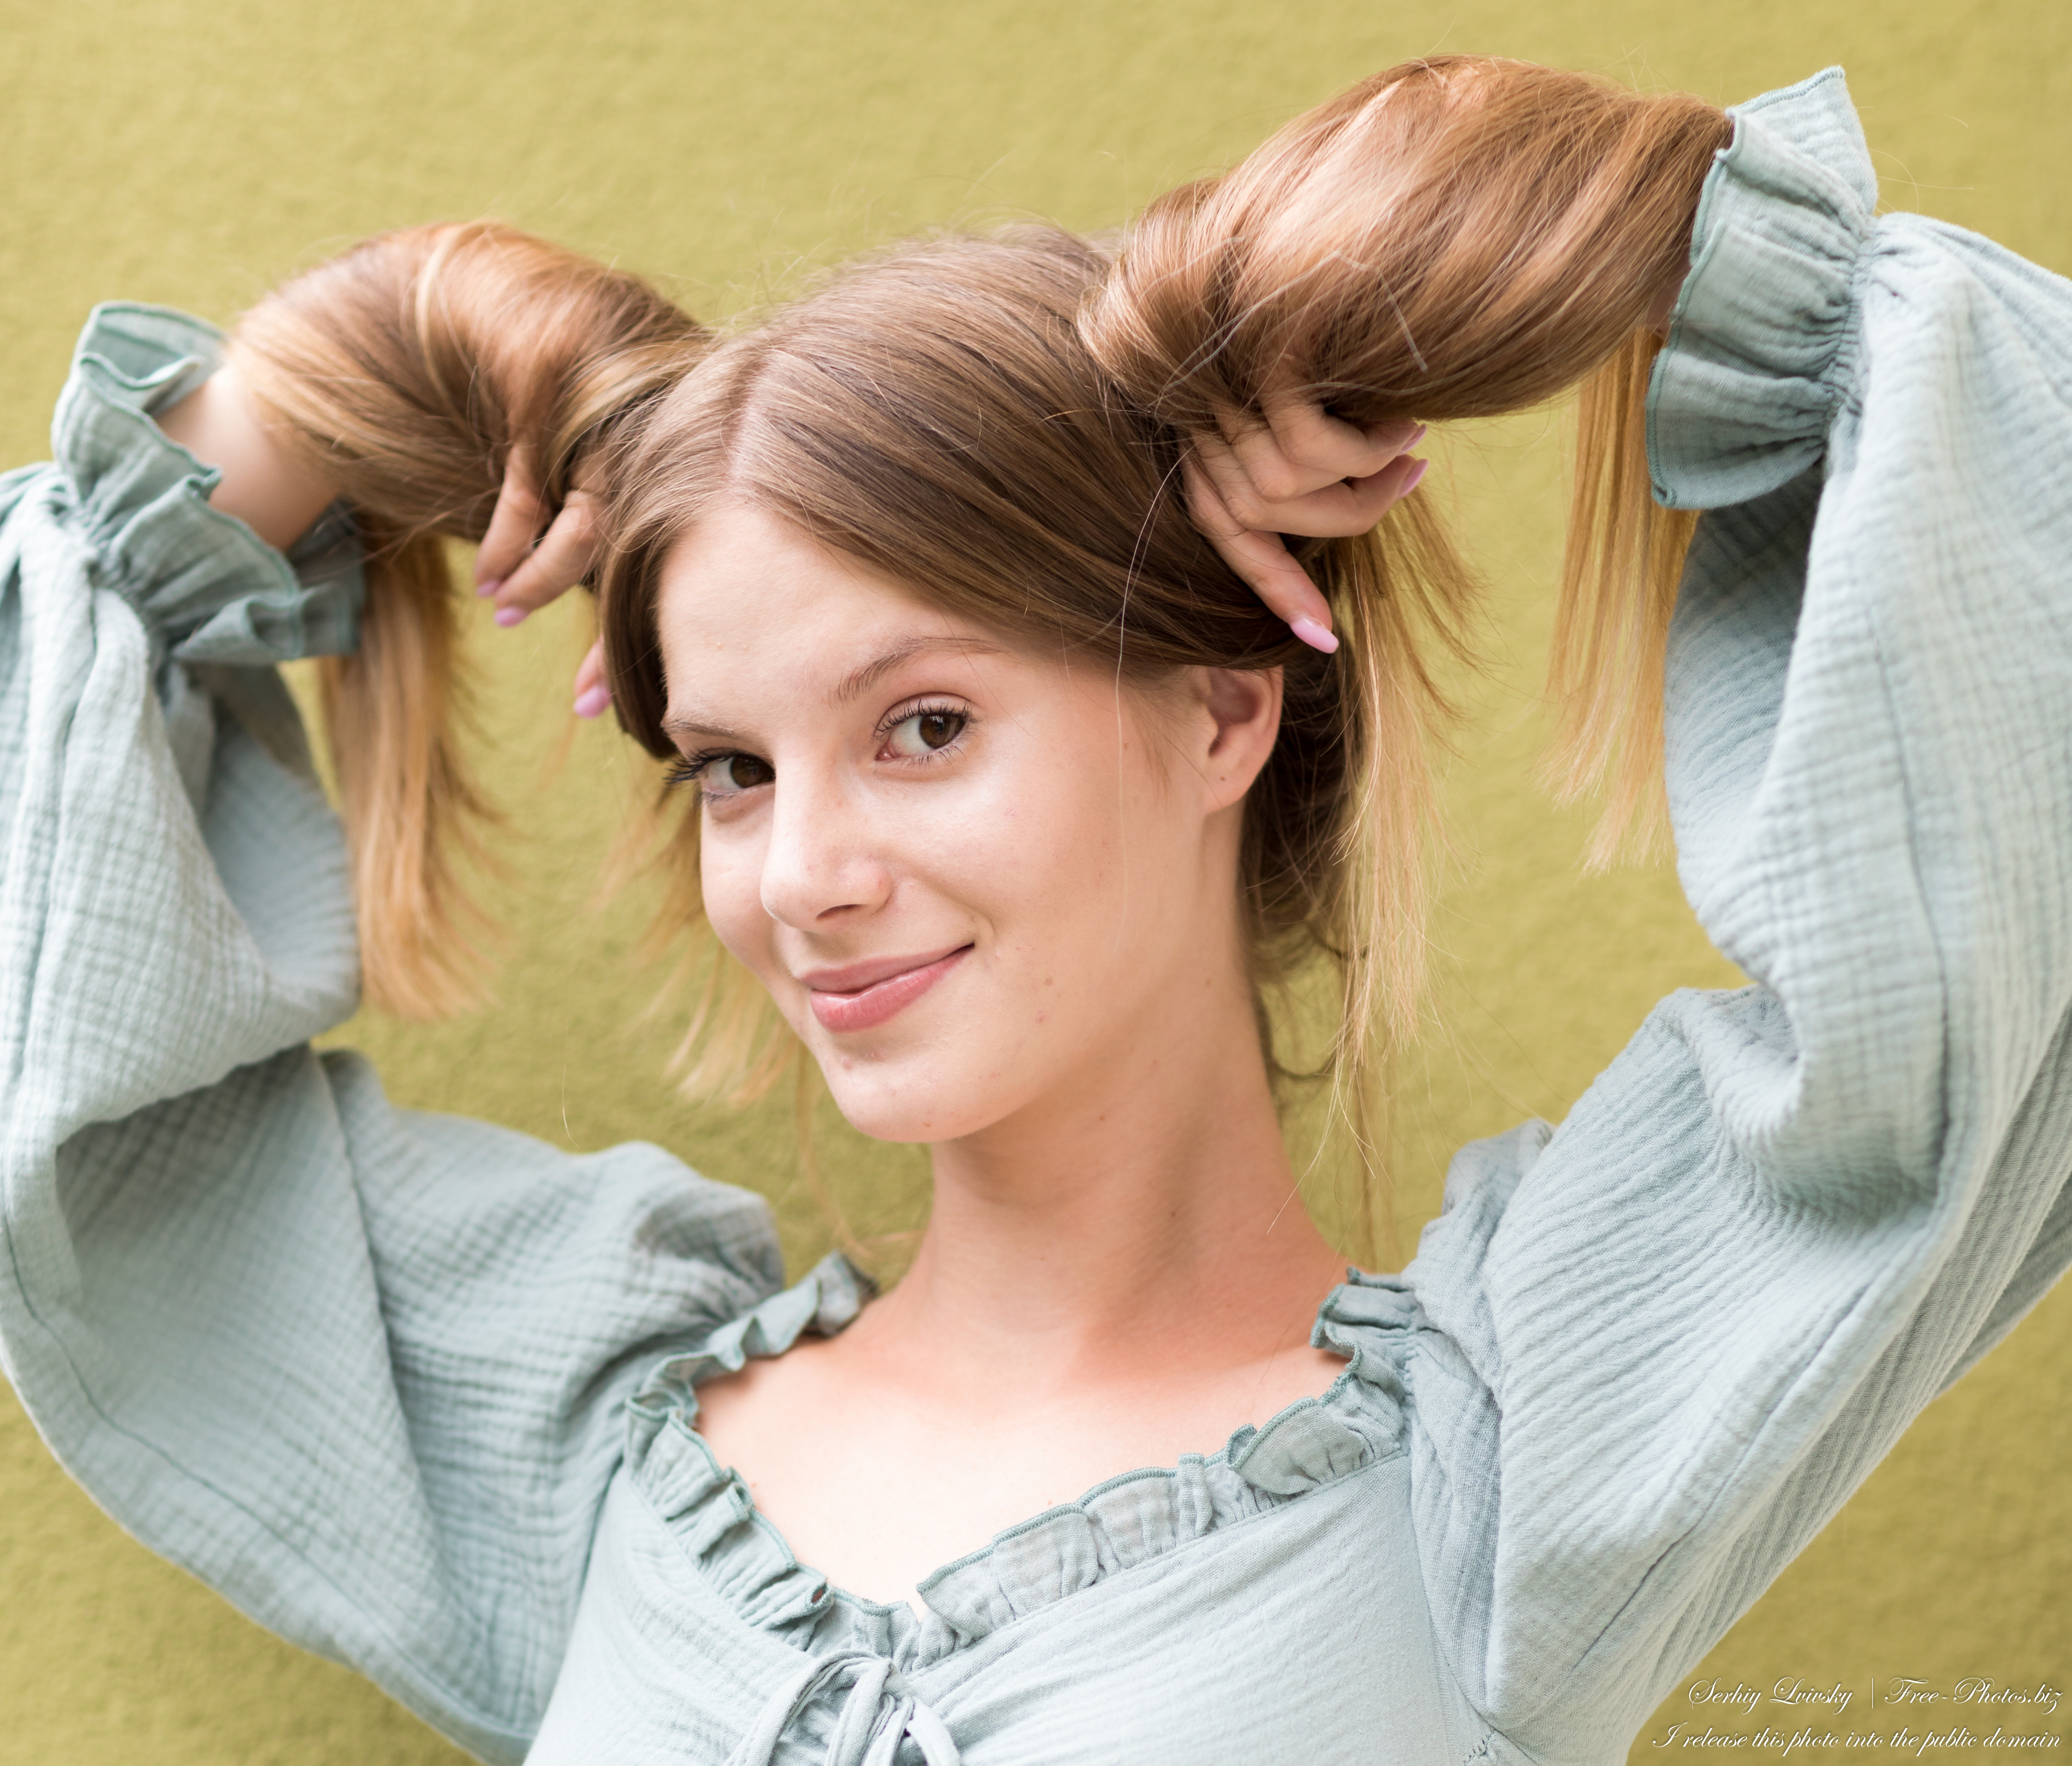 Vika - an 18-year-old girl with natural fair hair, the third photoshoot, taken in August 2023 by Serhiy Lvivsky, picture 49